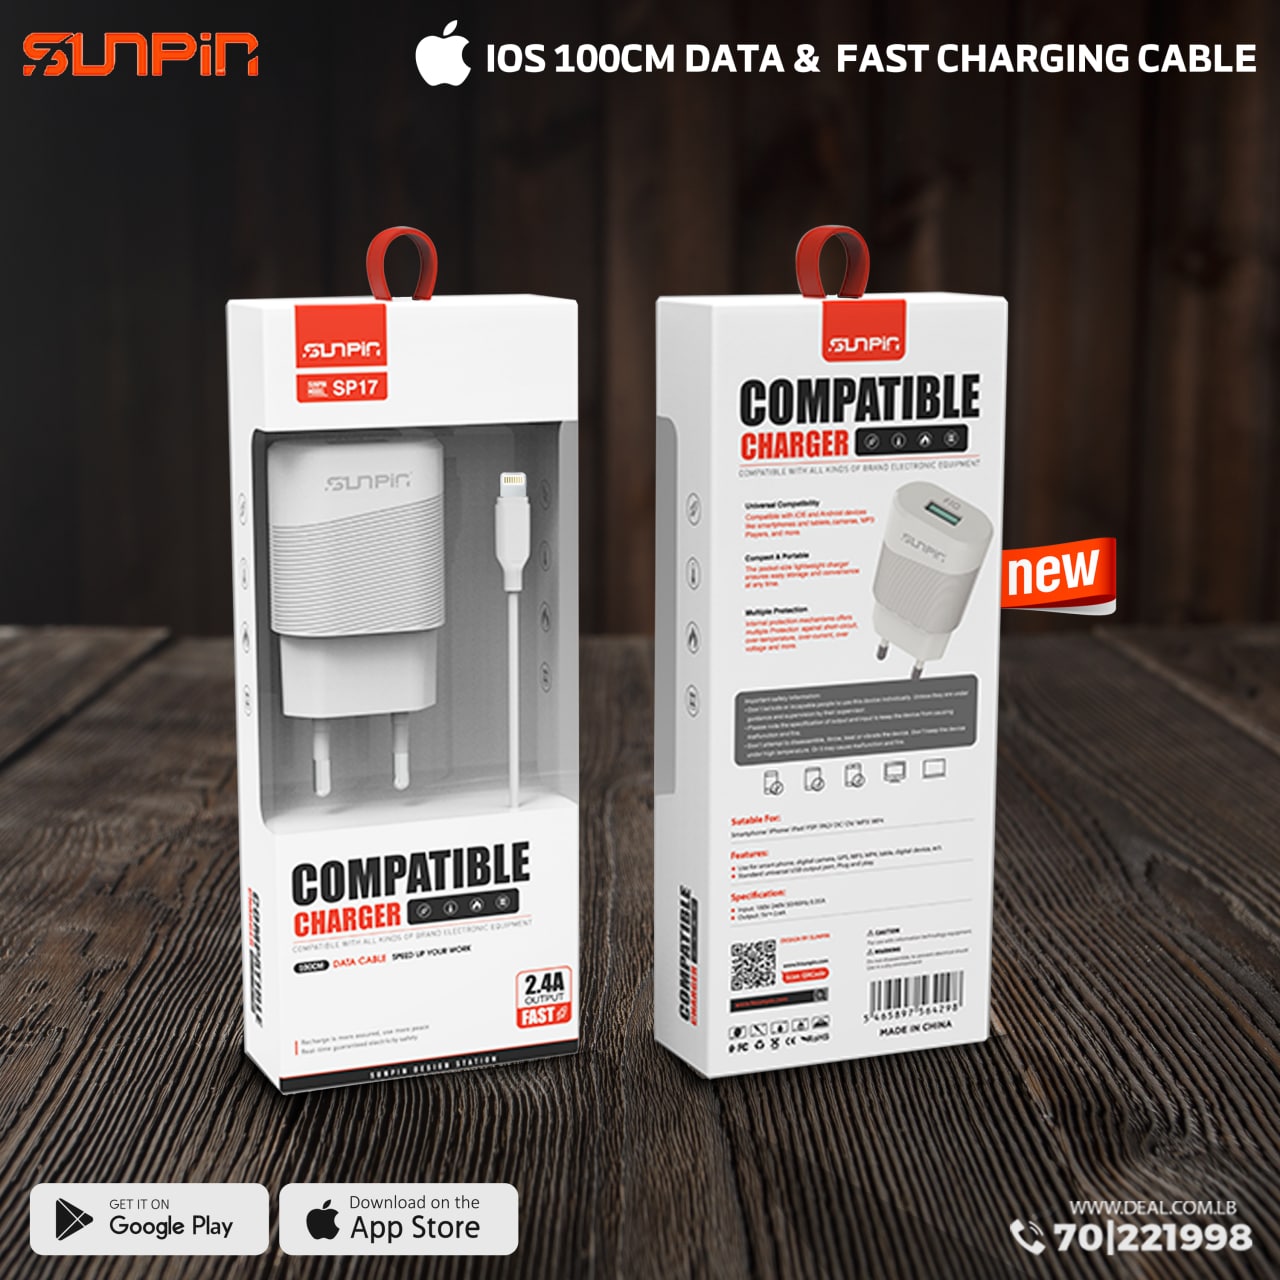 Sunpin+SP17+IOS+100CM+Data+%26++Fast+Charging+Cable+2.4A+OUTPUT